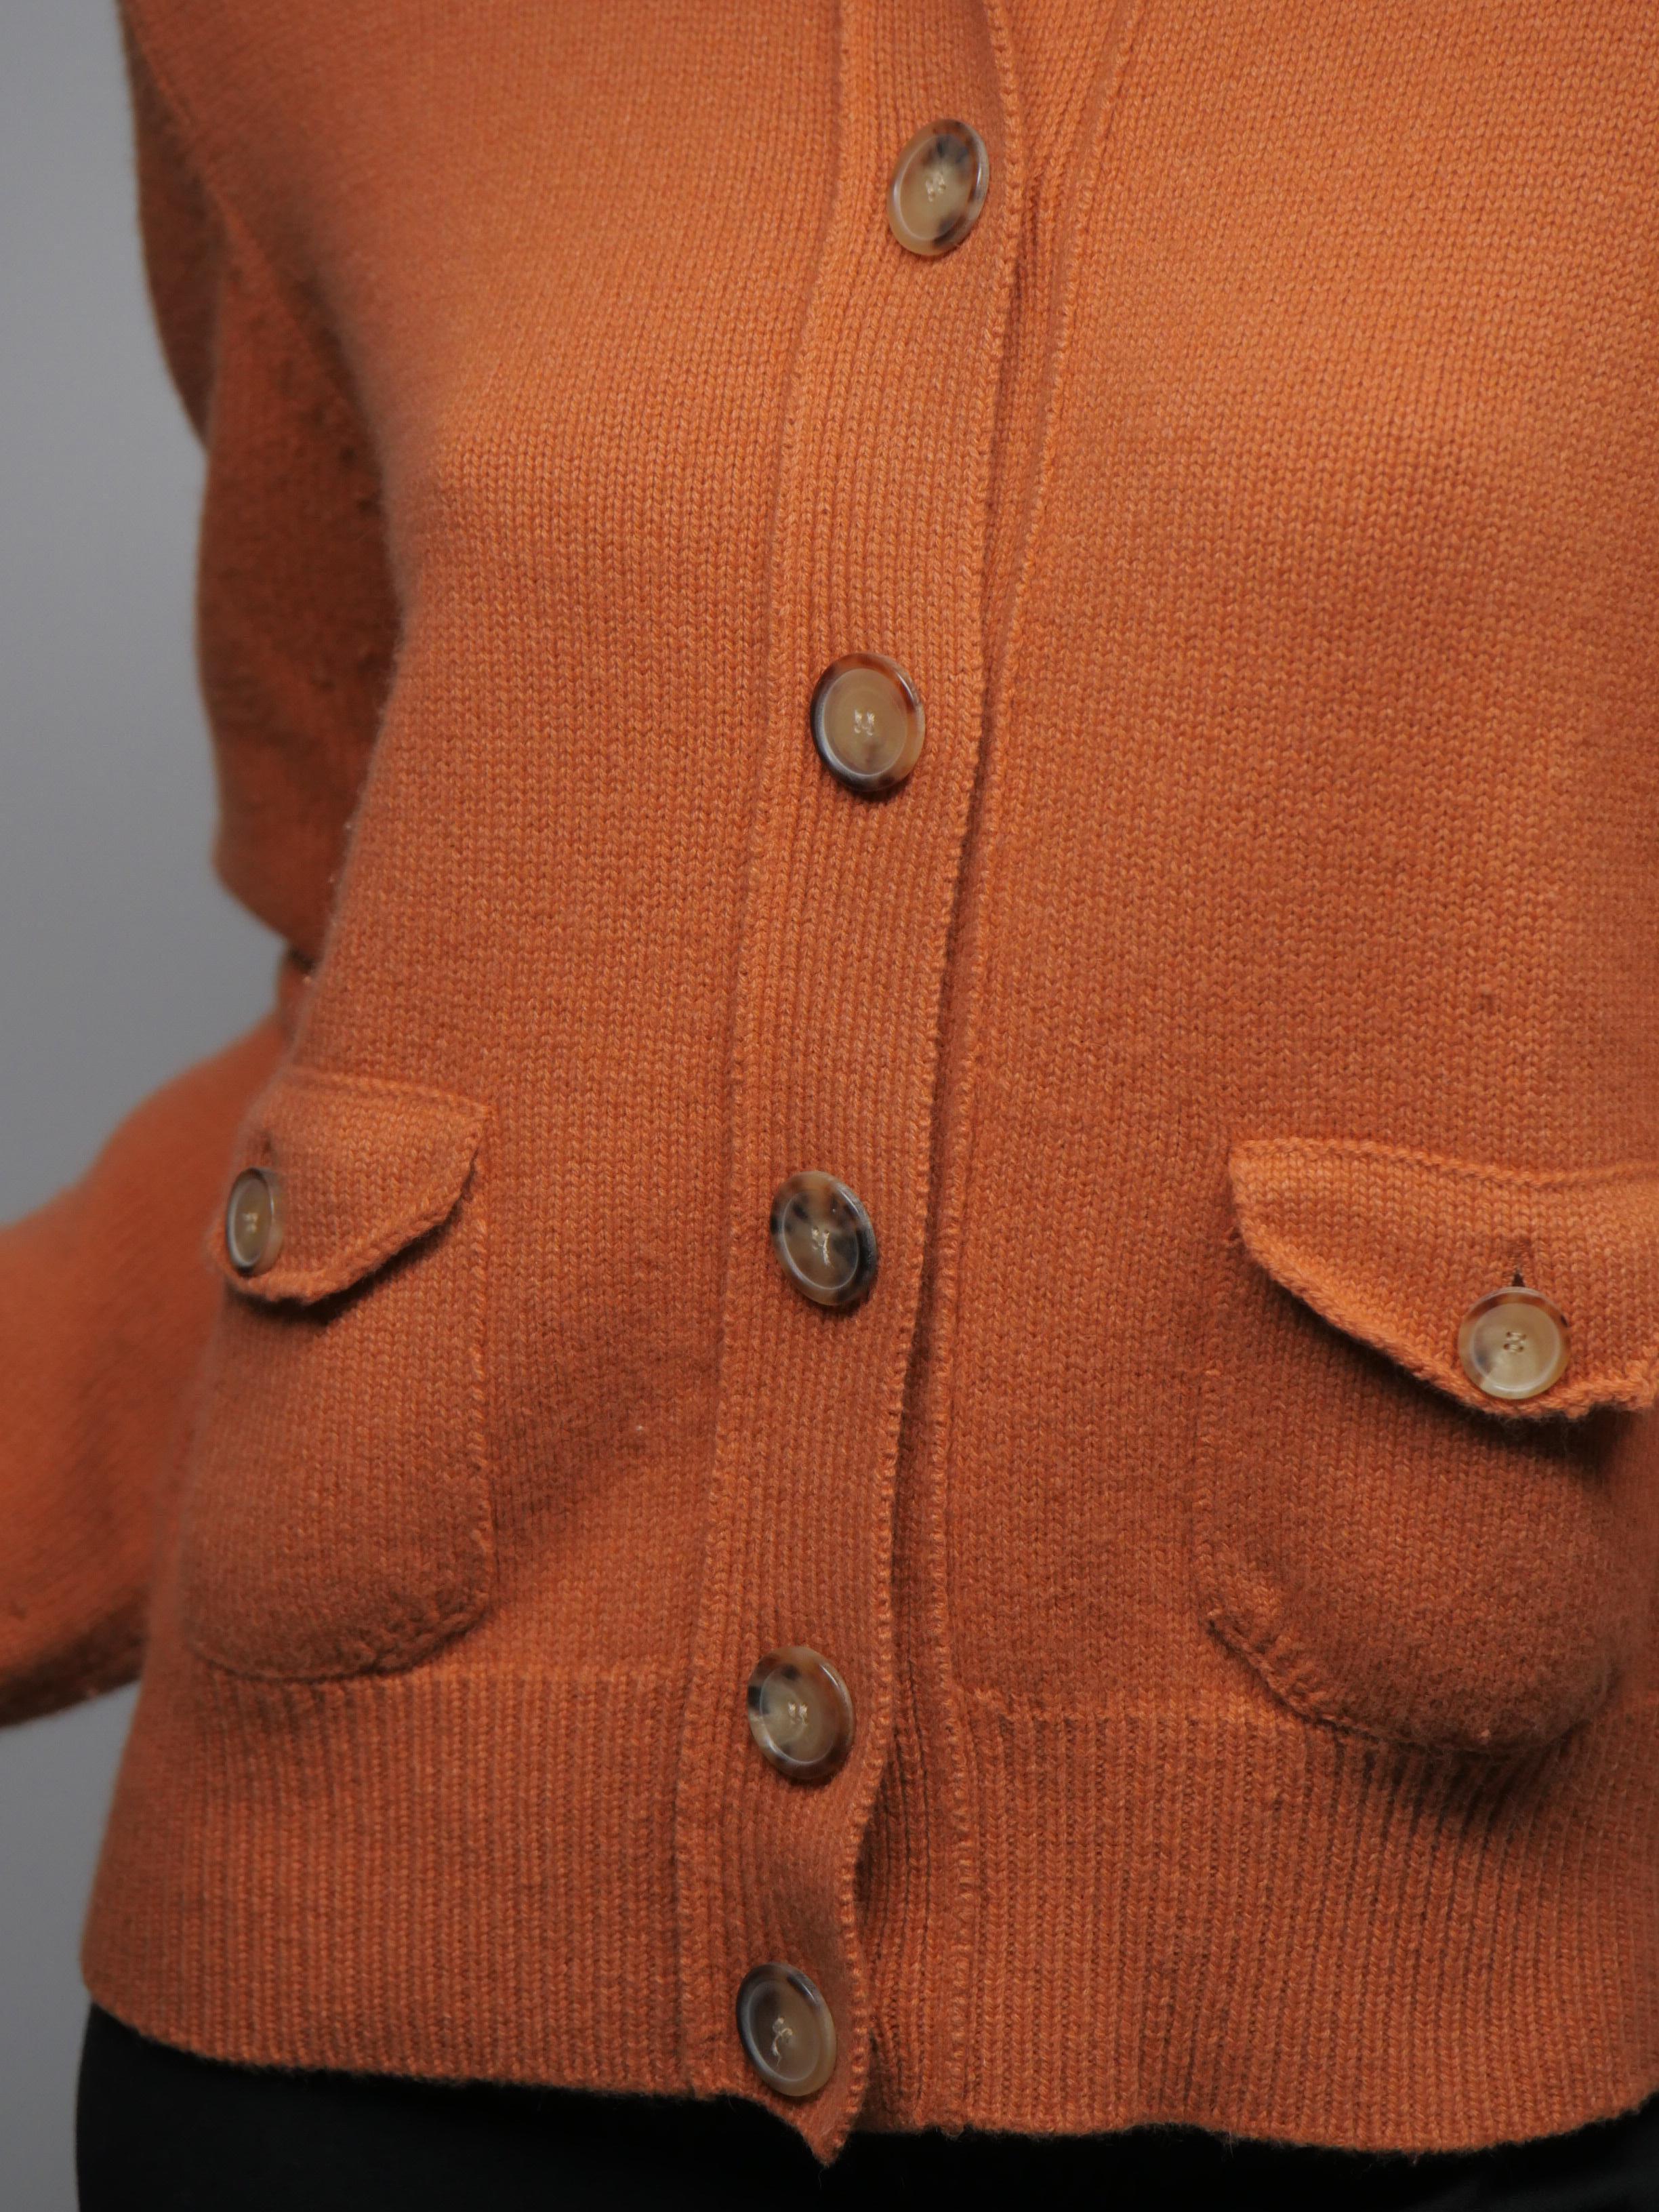 Long Sleeve Knit Button front sweater with pockets